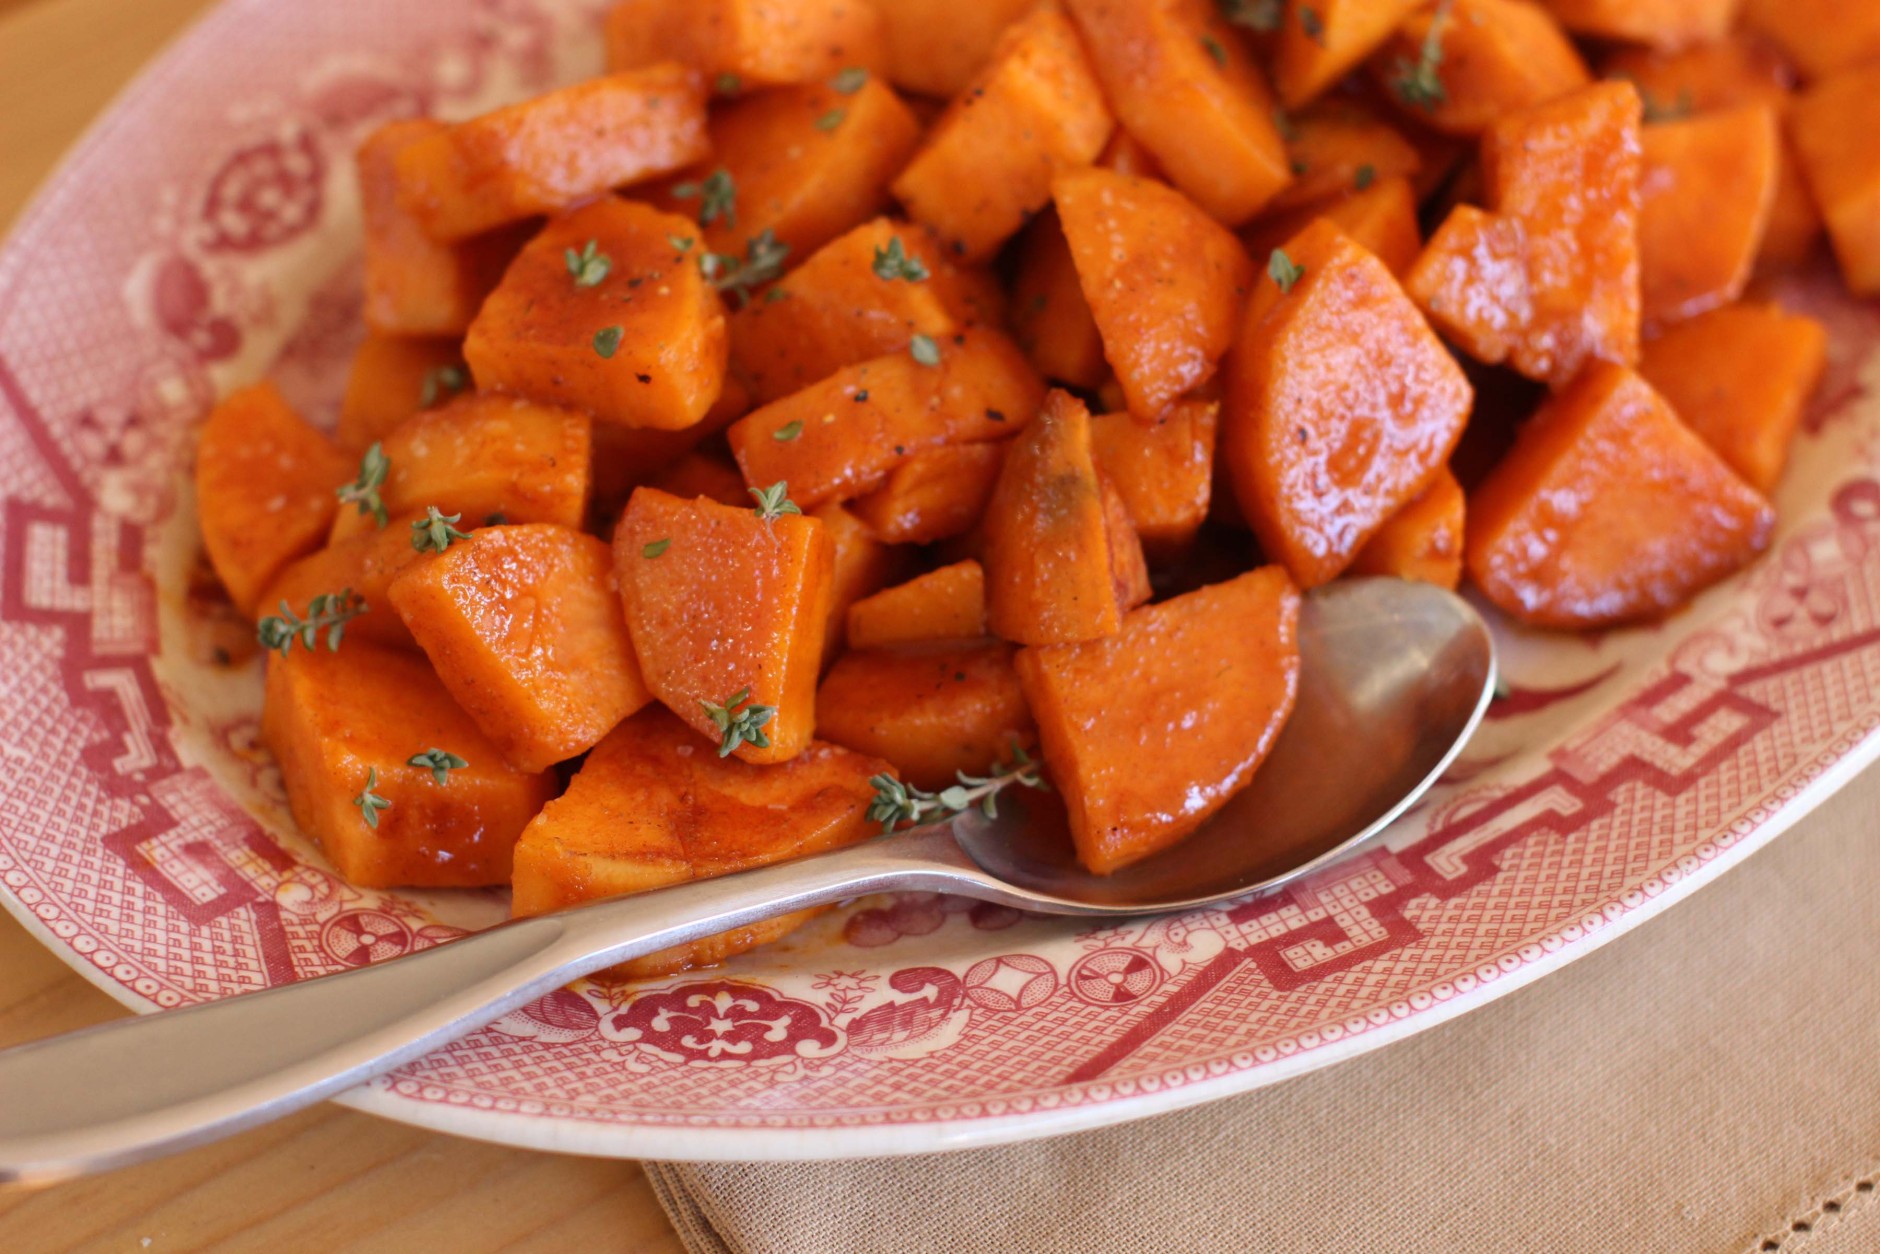 This Oct.  26, 2015 photo shows skillet glazed spicy sweet potatoes in Concord, NH.  No room in the oven, you can cook these delicious glazed sweet potatoes on top of the stove in about 10 minutes flat. (AP Photo/Matthew Mead)